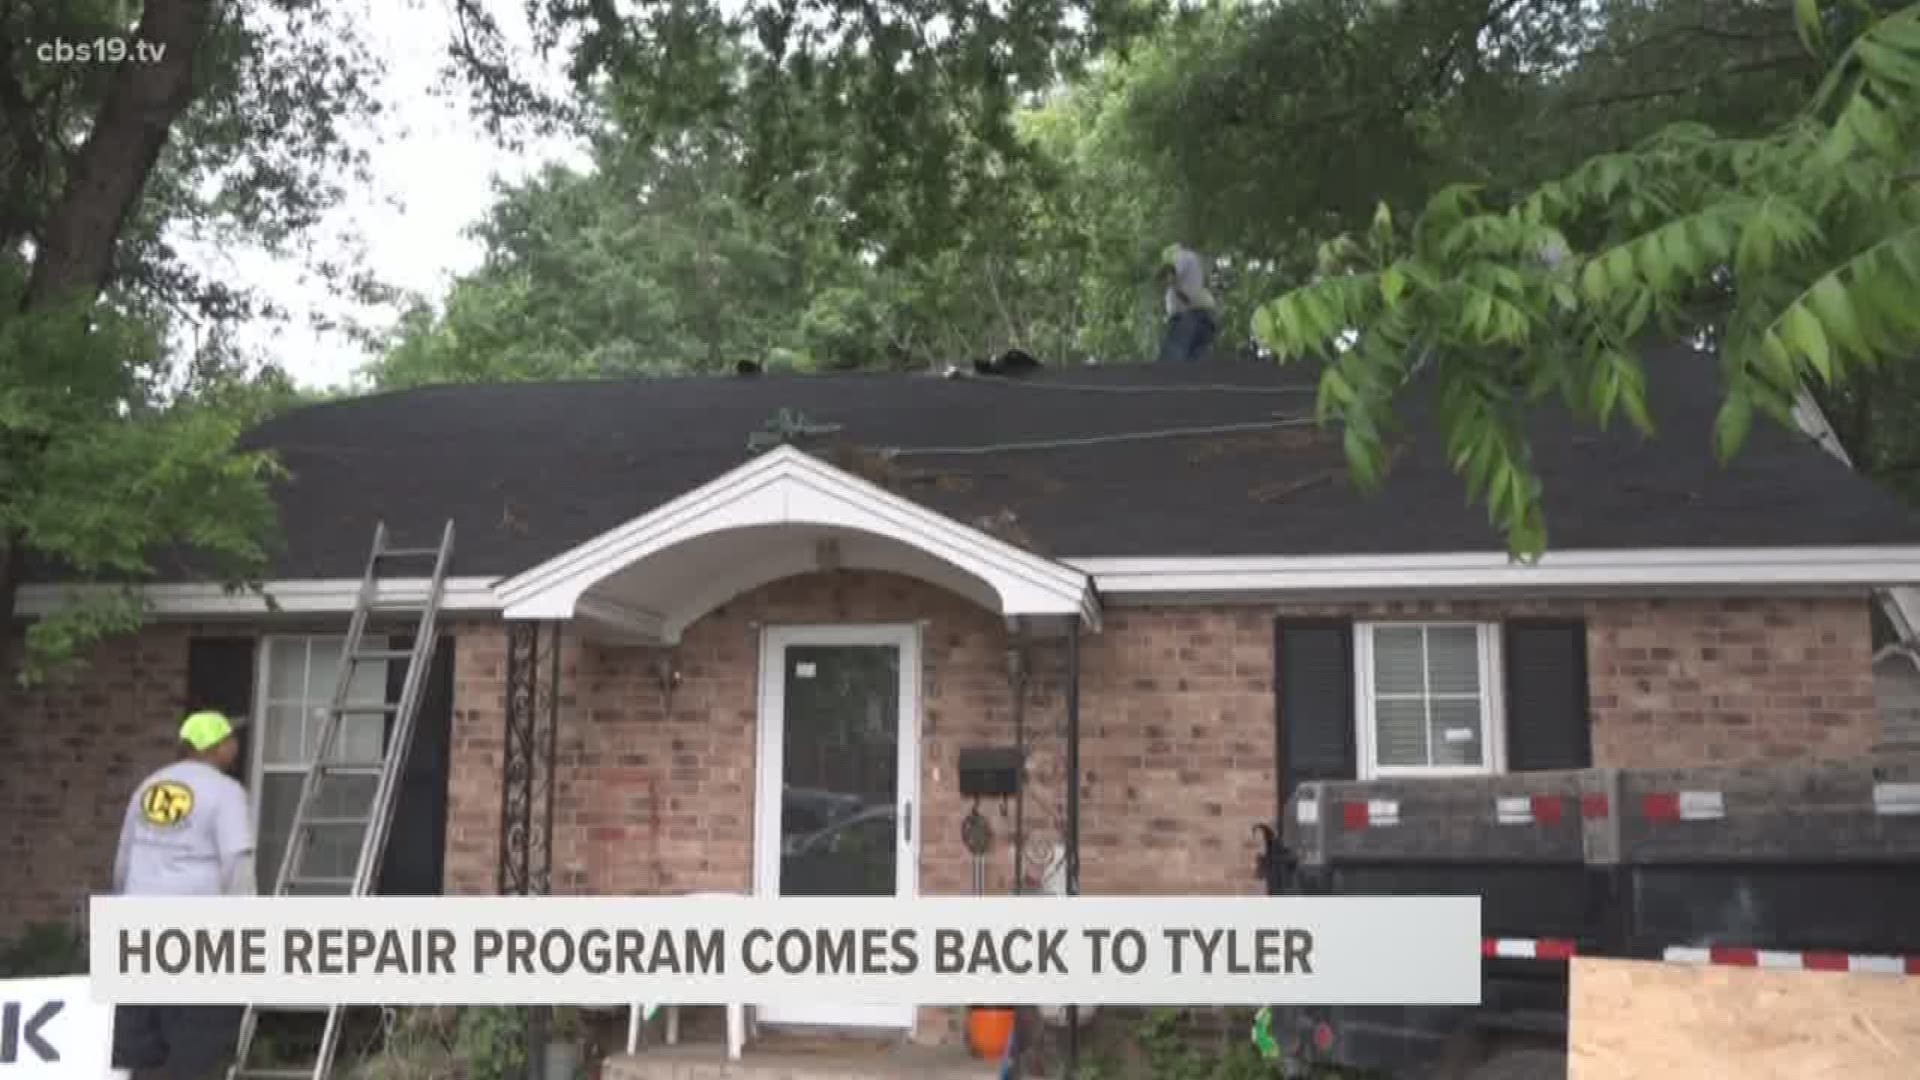 The City of Tyler and Habitat for Humanity of Smith County are partnering together for the city's critical home repair program for low to moderate-income families.